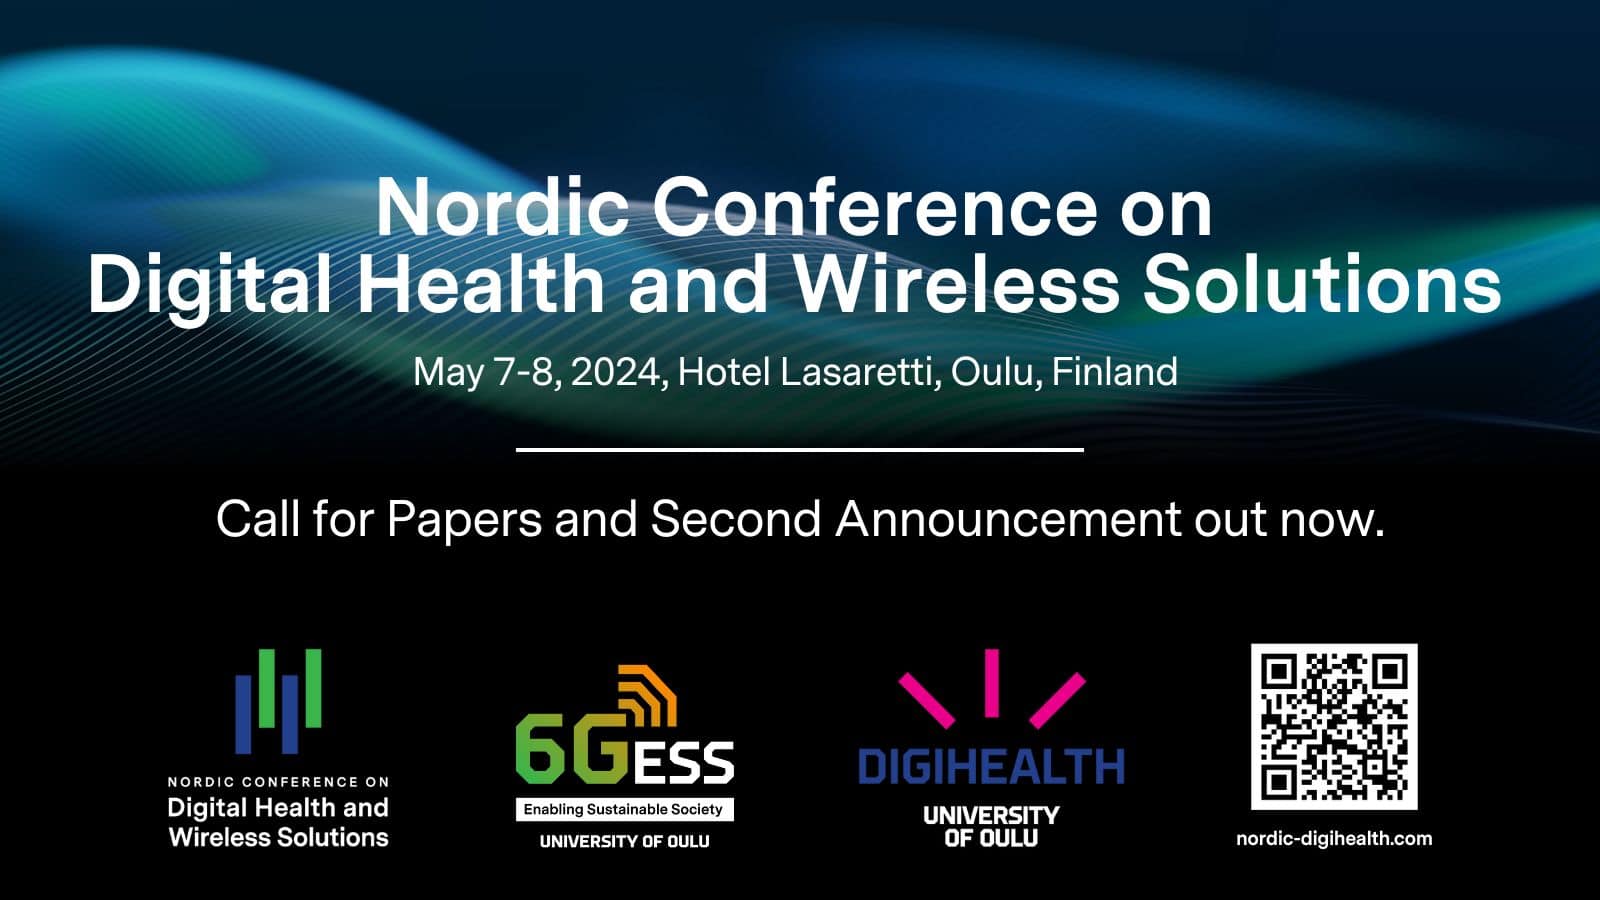 Nordic Conference on Digital Health and Wireless Solutions